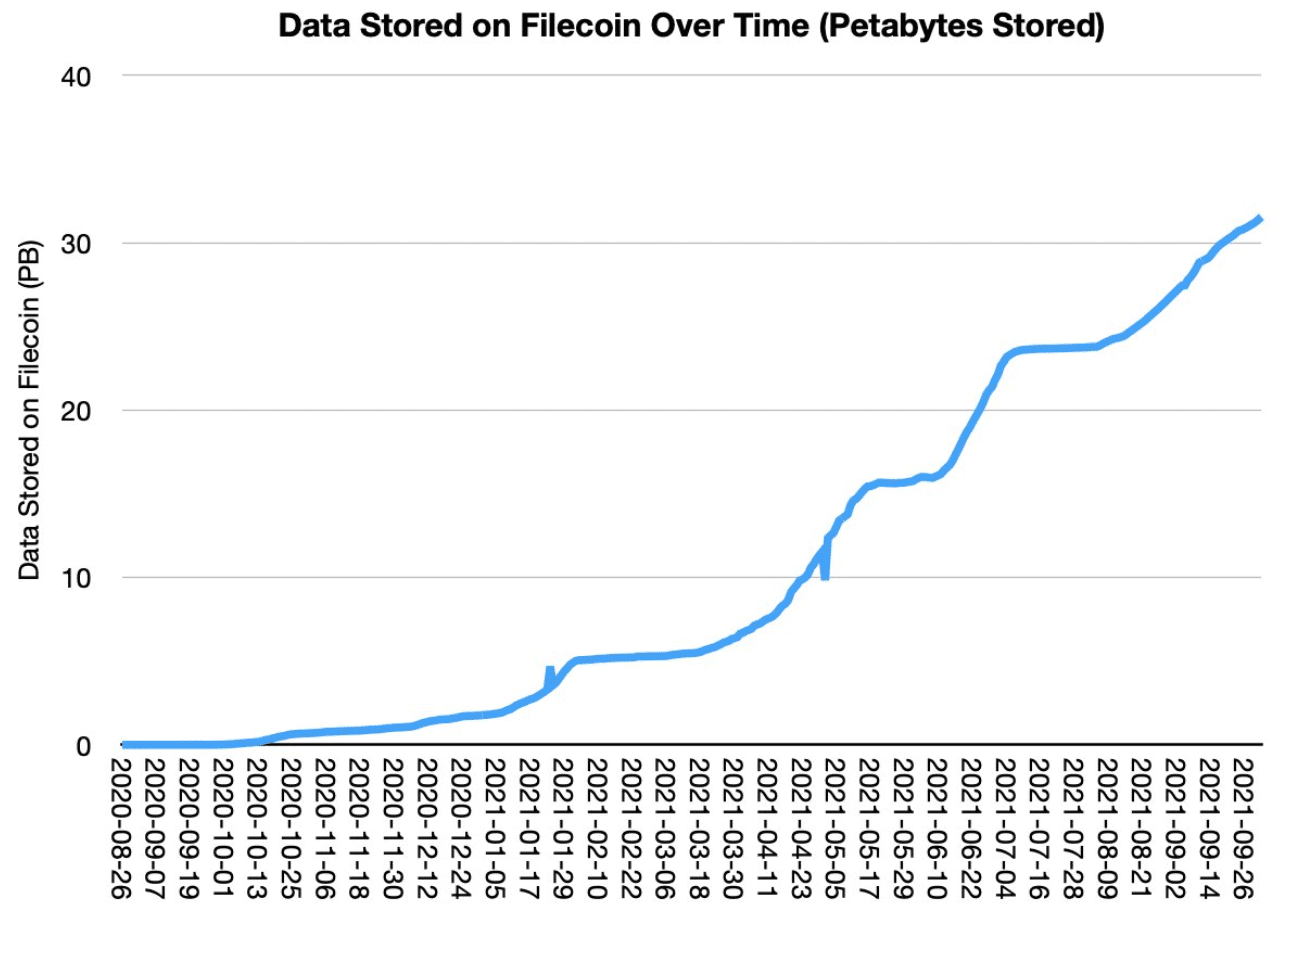 Data stored on Filecoin